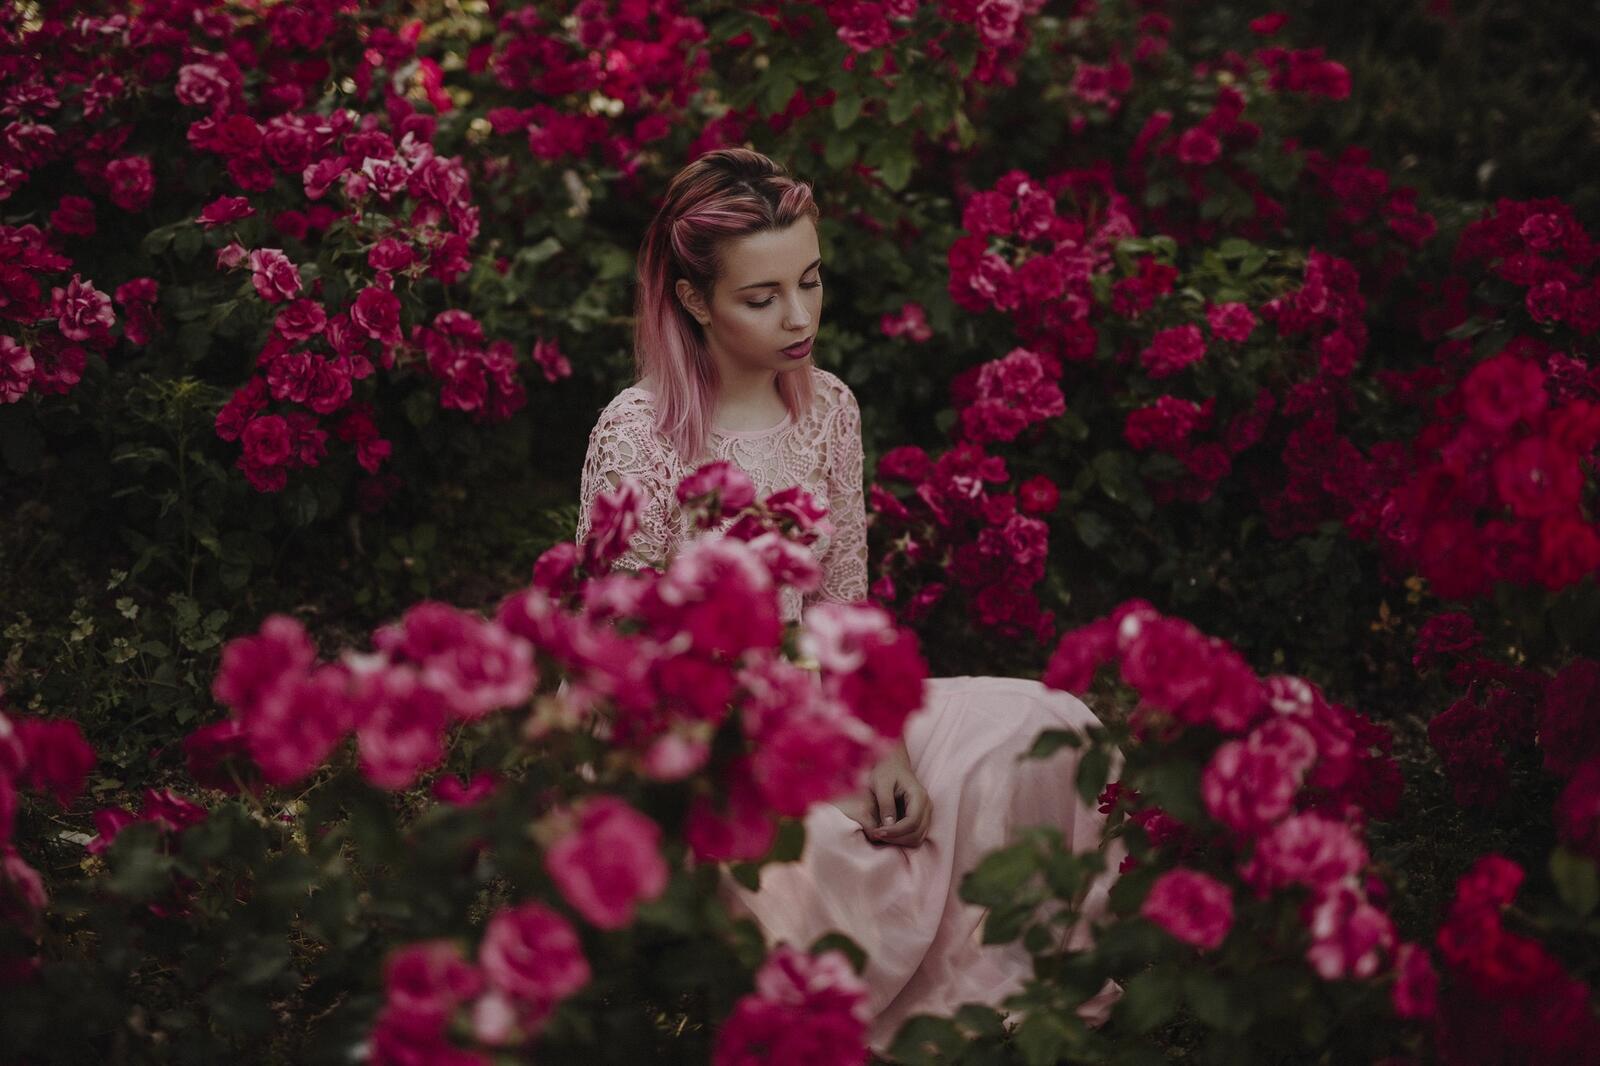 Free photo A girl in a pink dress sitting in a garden among pink roses